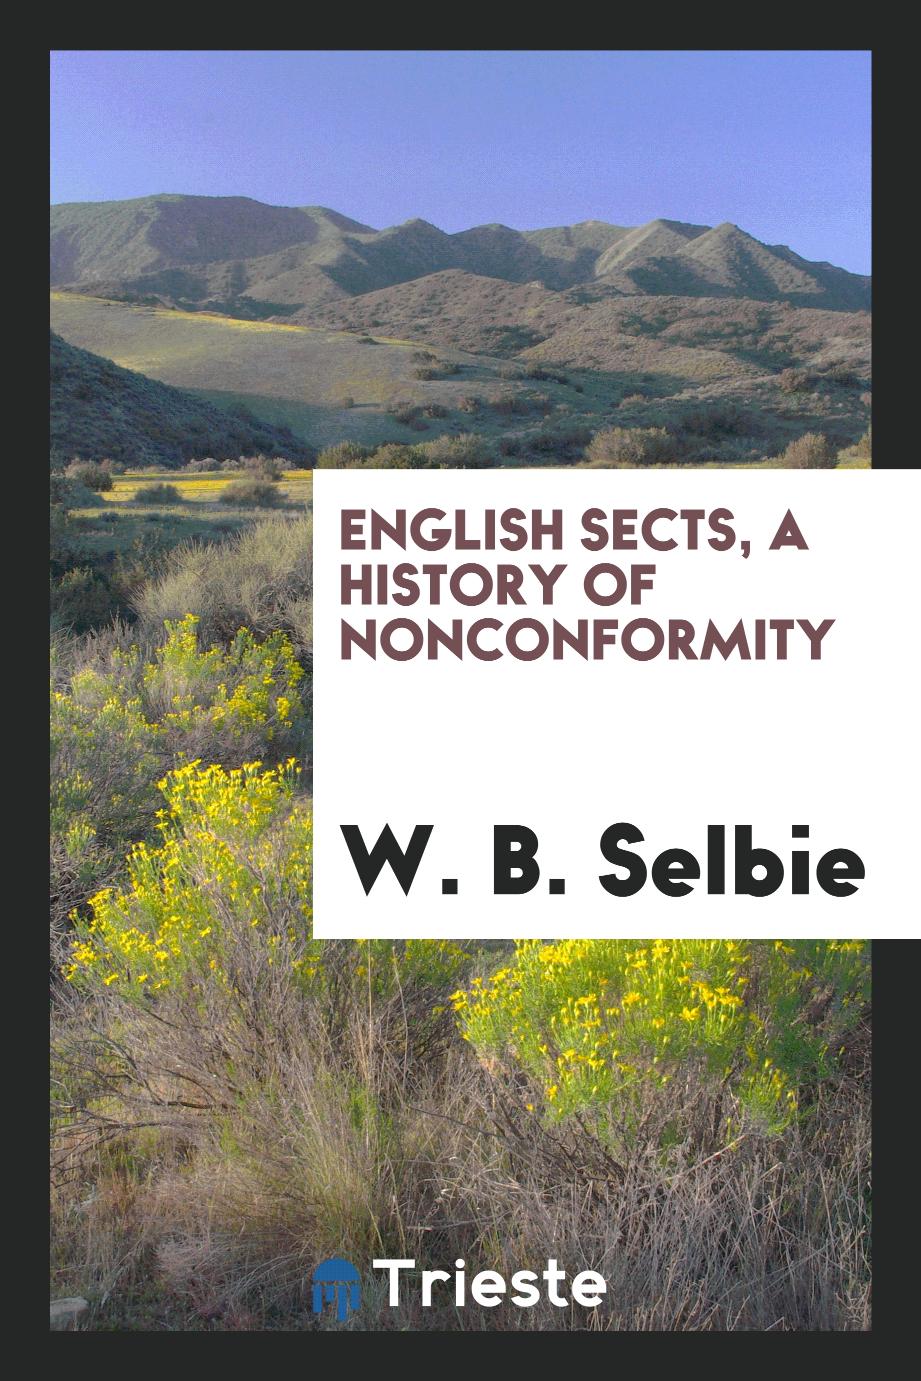 English sects, a history of nonconformity